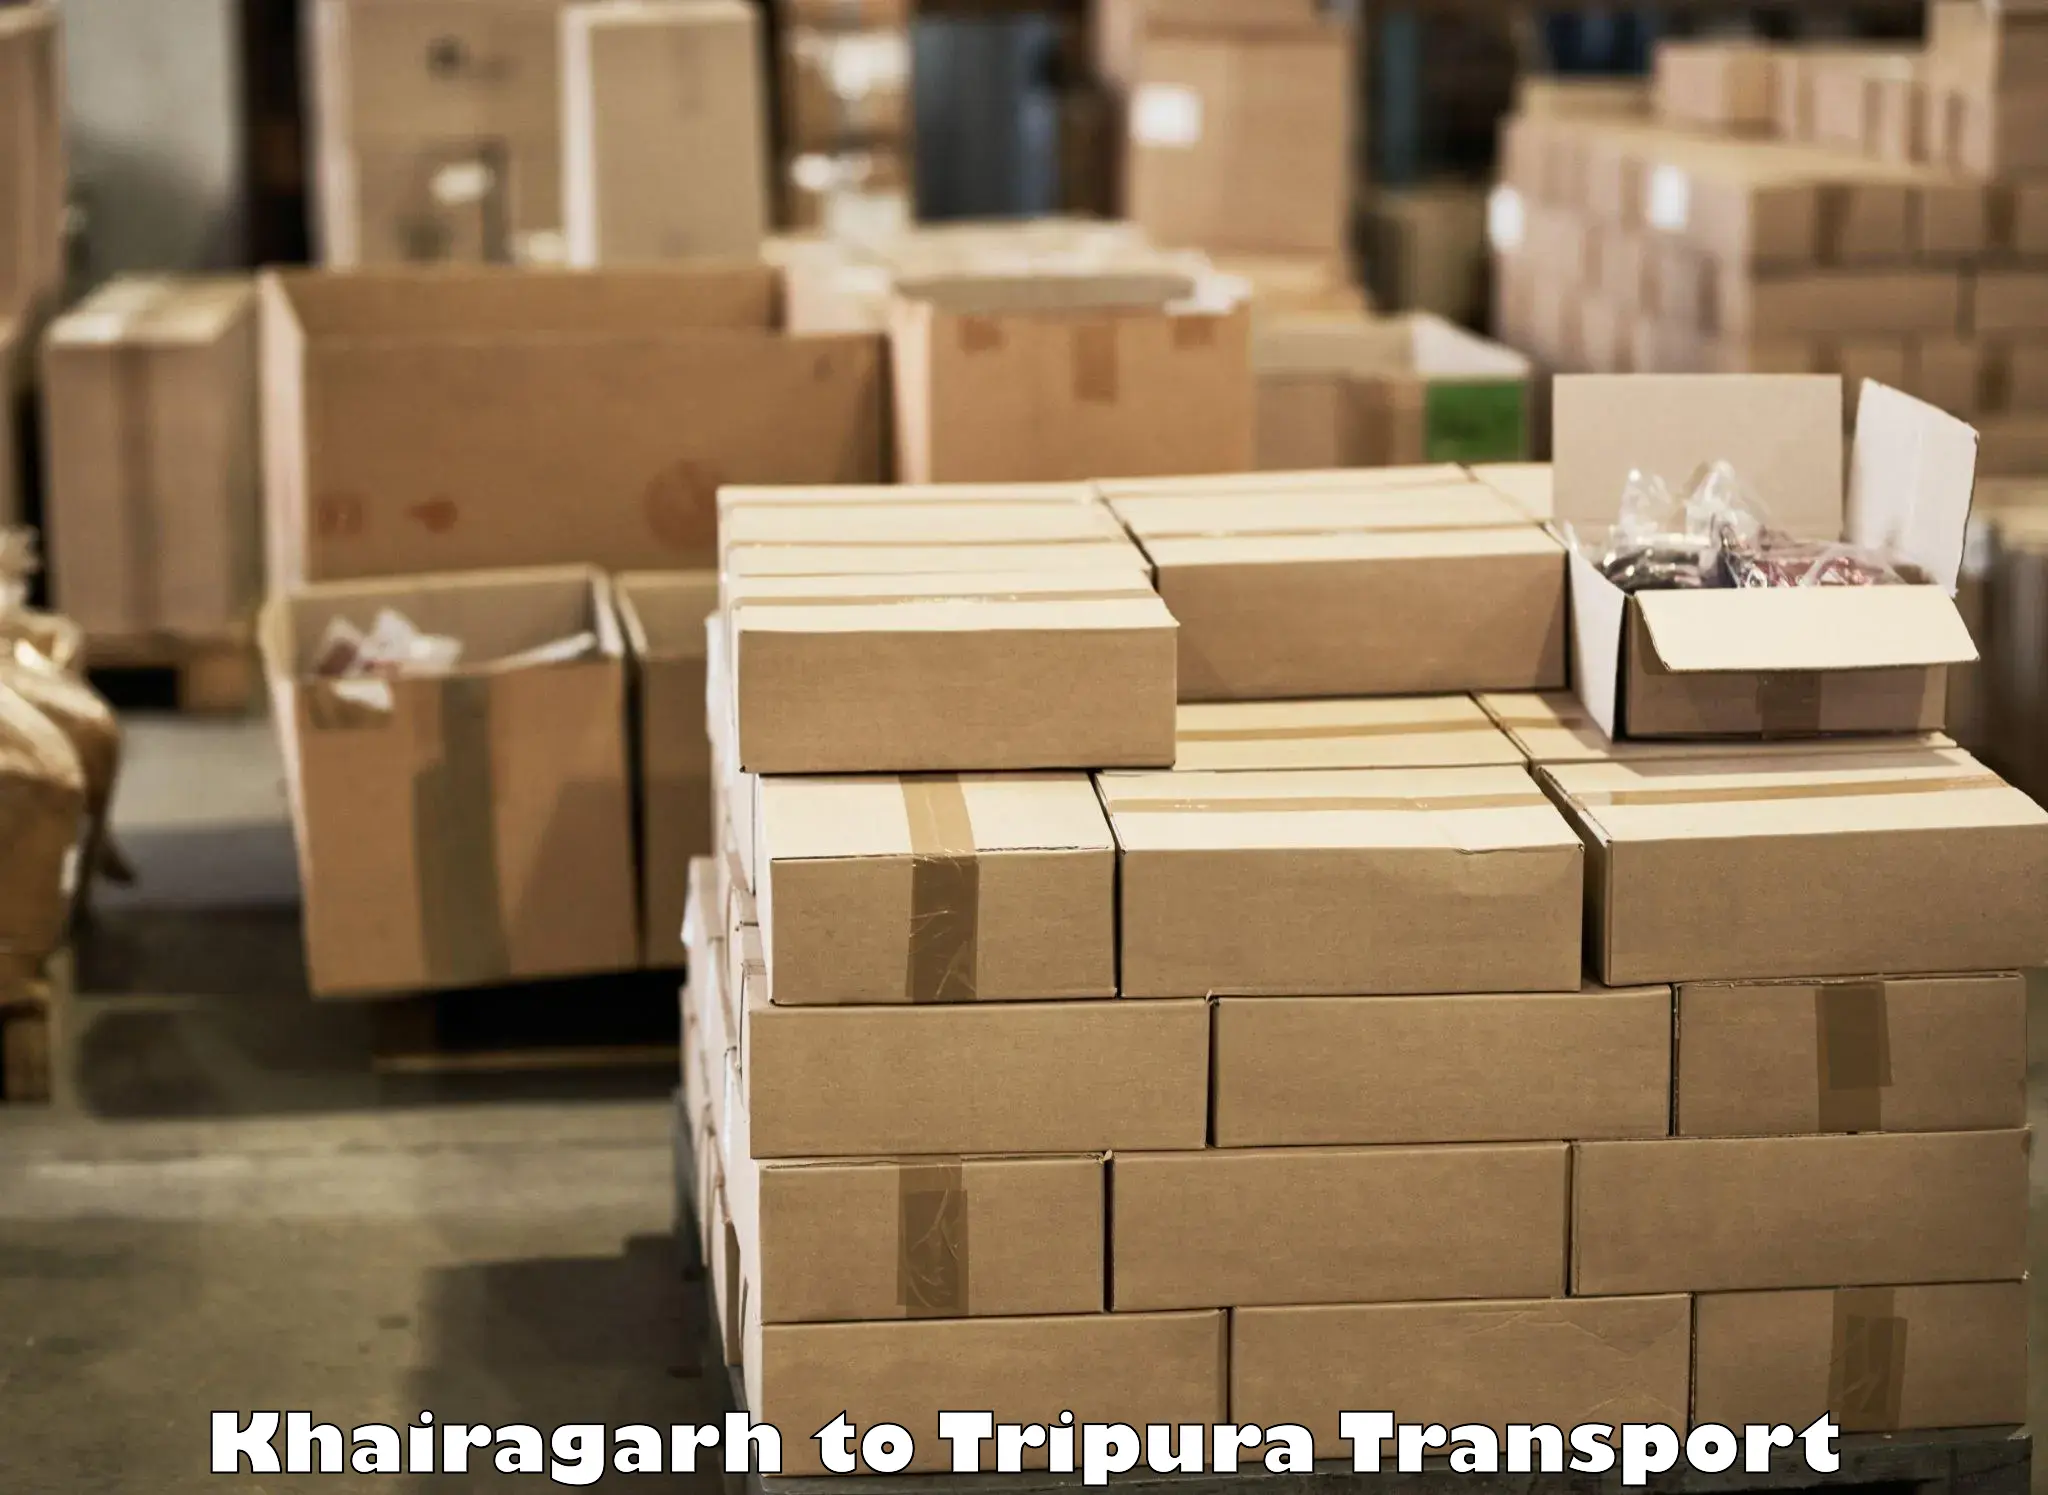 Container transport service Khairagarh to Dhalai